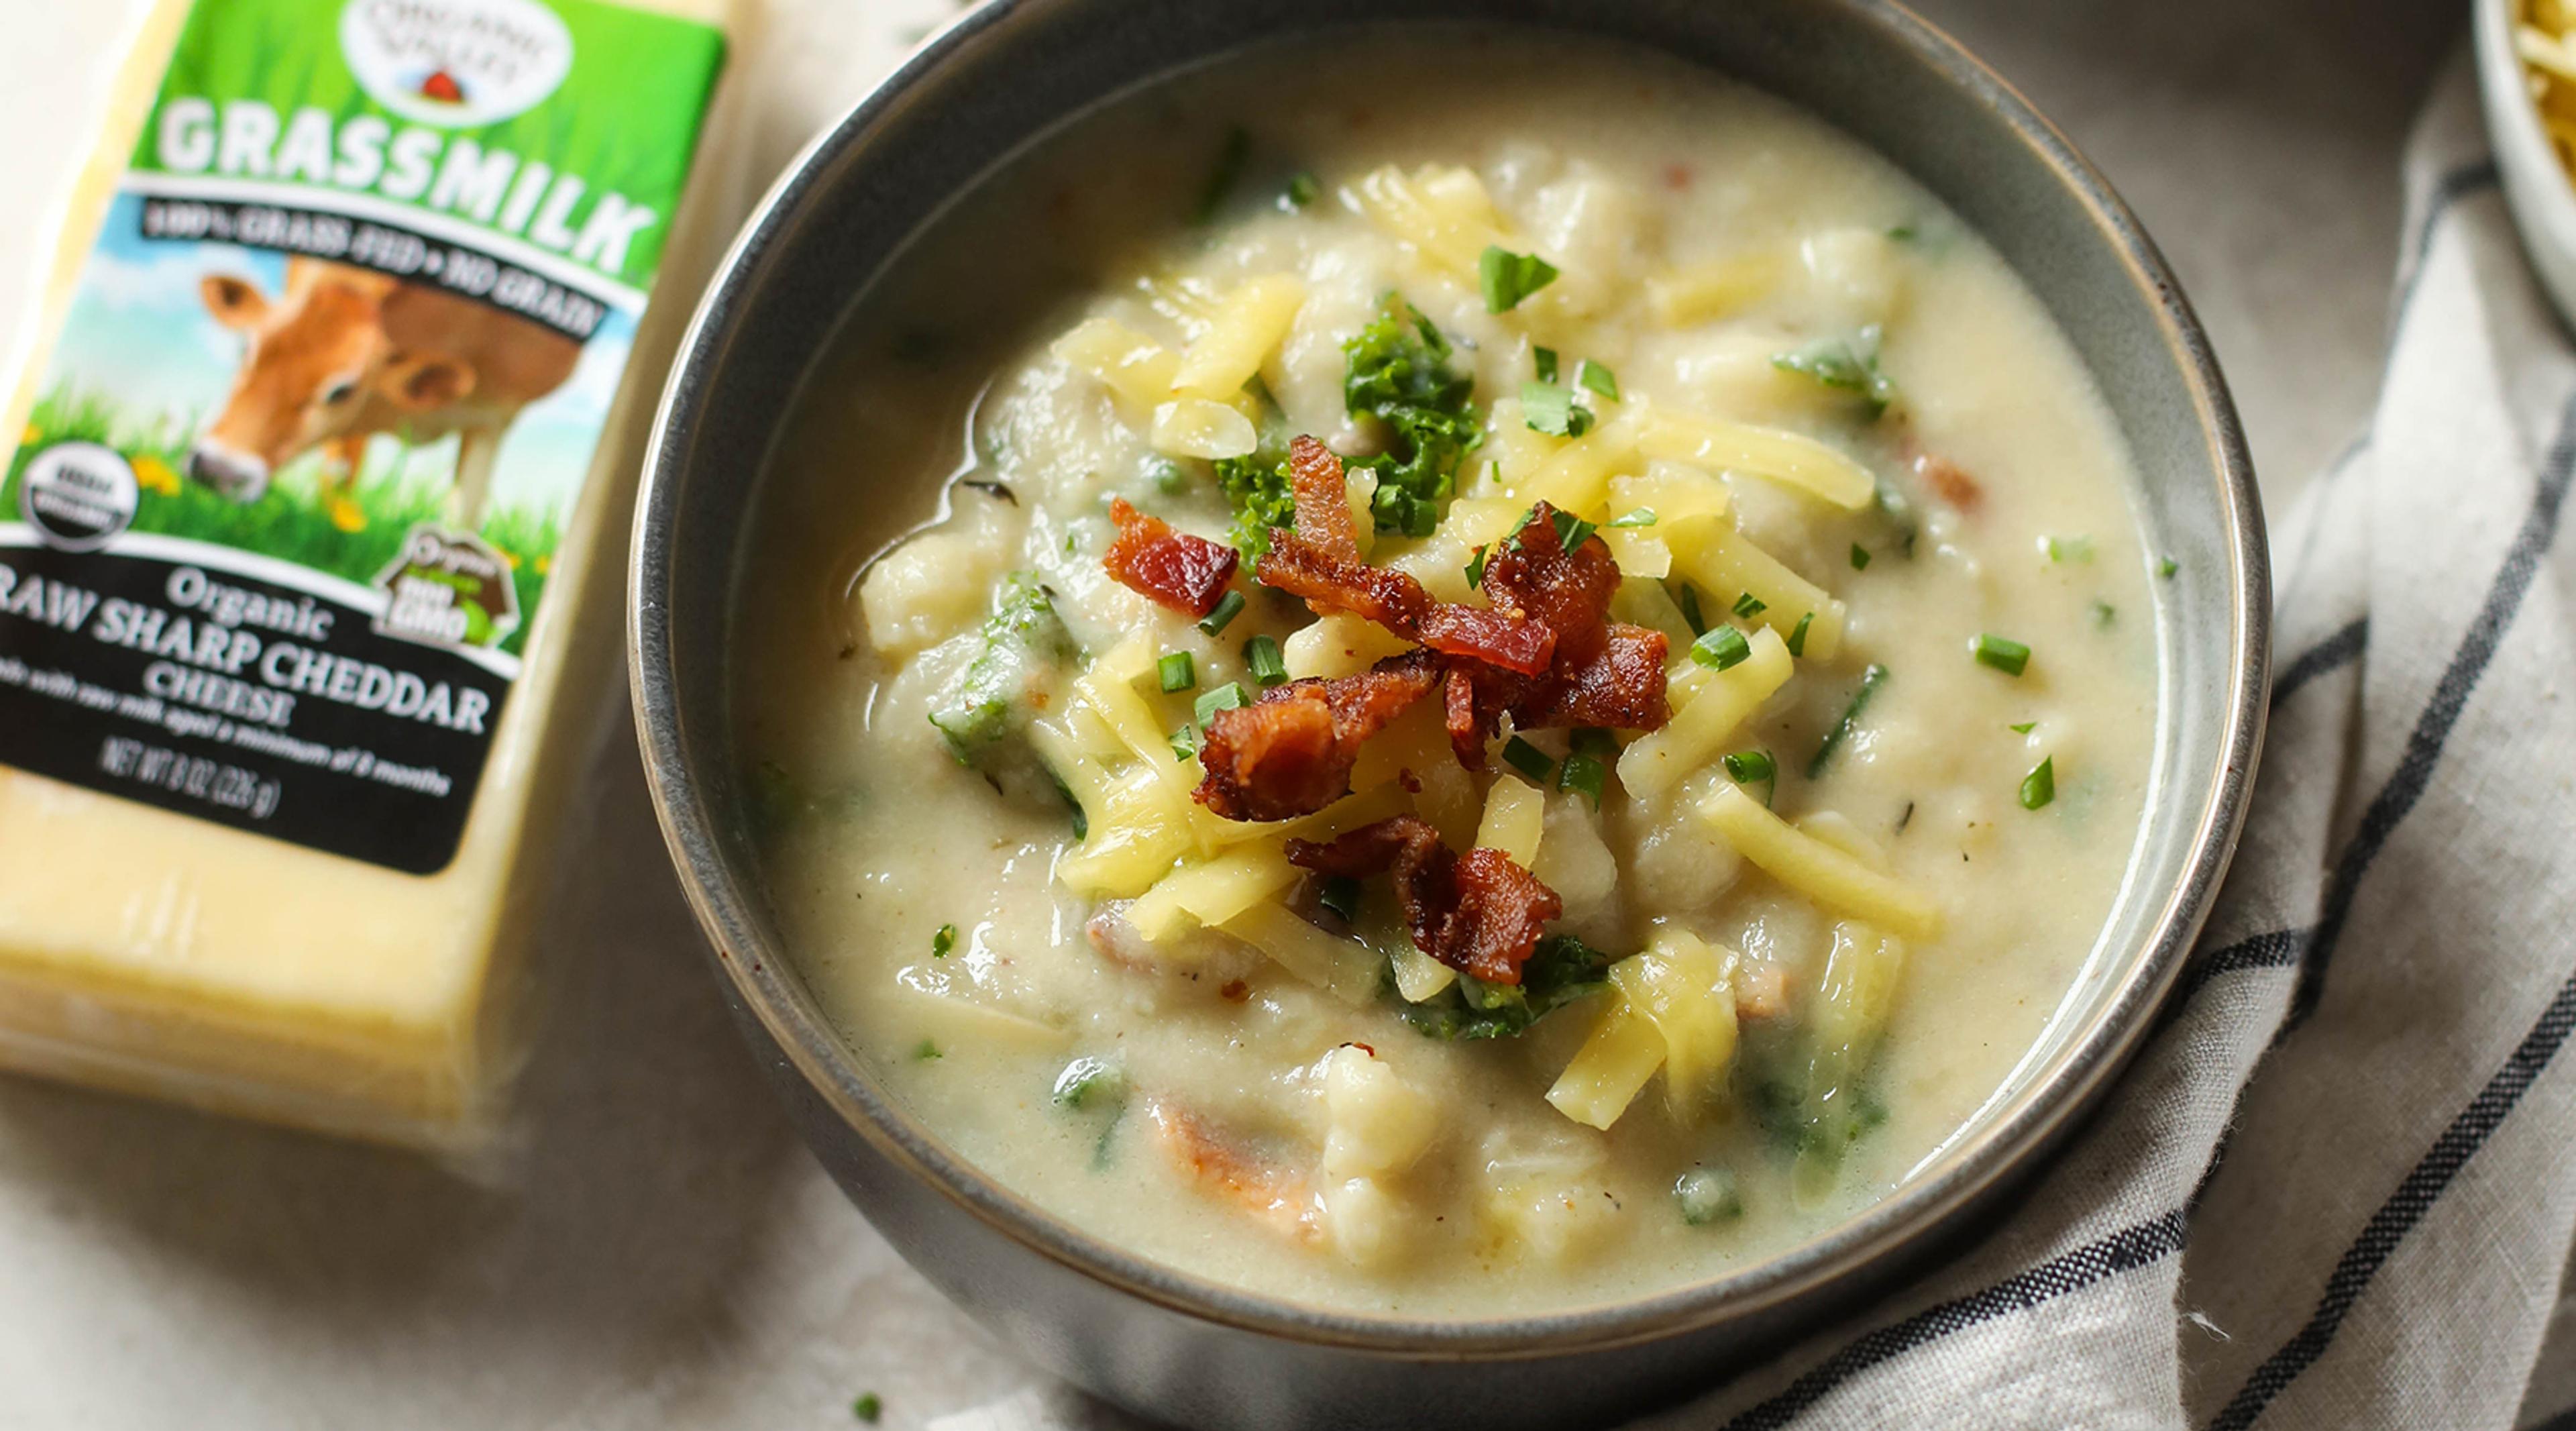 A bowl of Loaded Cheesy Cauliflower Soup using Organic Valley’s Grassmilk Cheddar, topped with bacon crumbles. Image credit: the Real Food Dietitians.